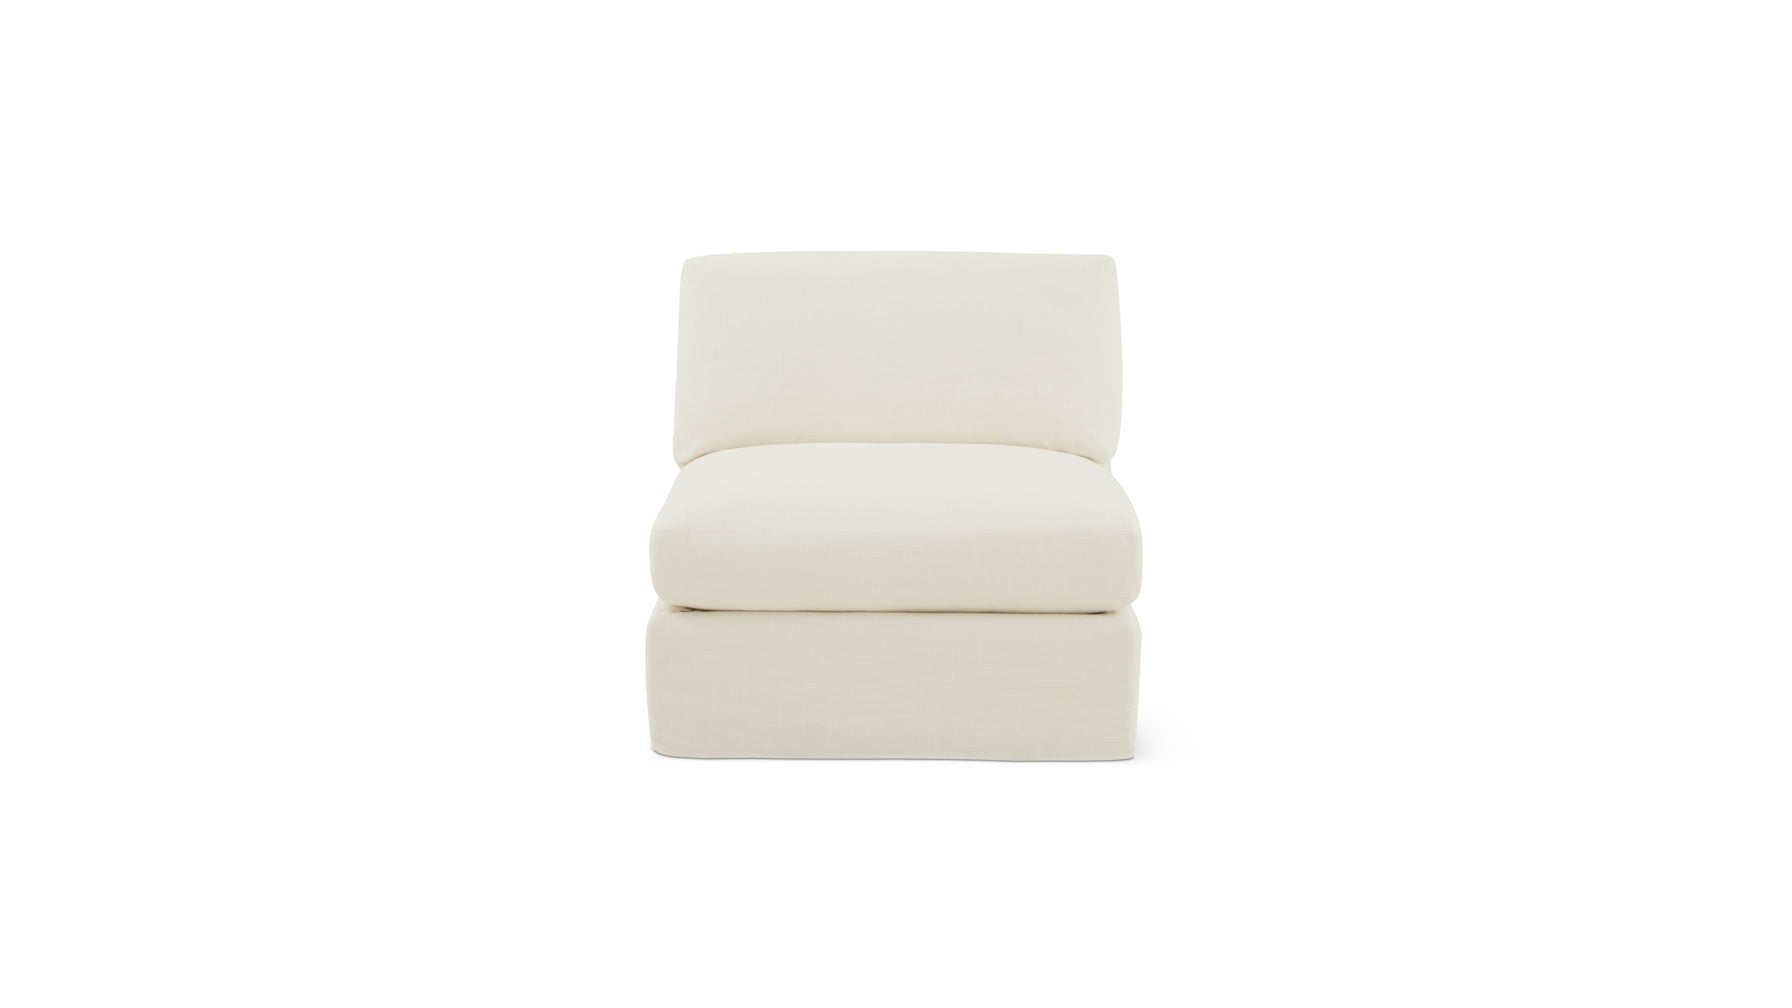 Slipcover - Get Together™ Armless Chair, Standard, Cream Linen - Image 2